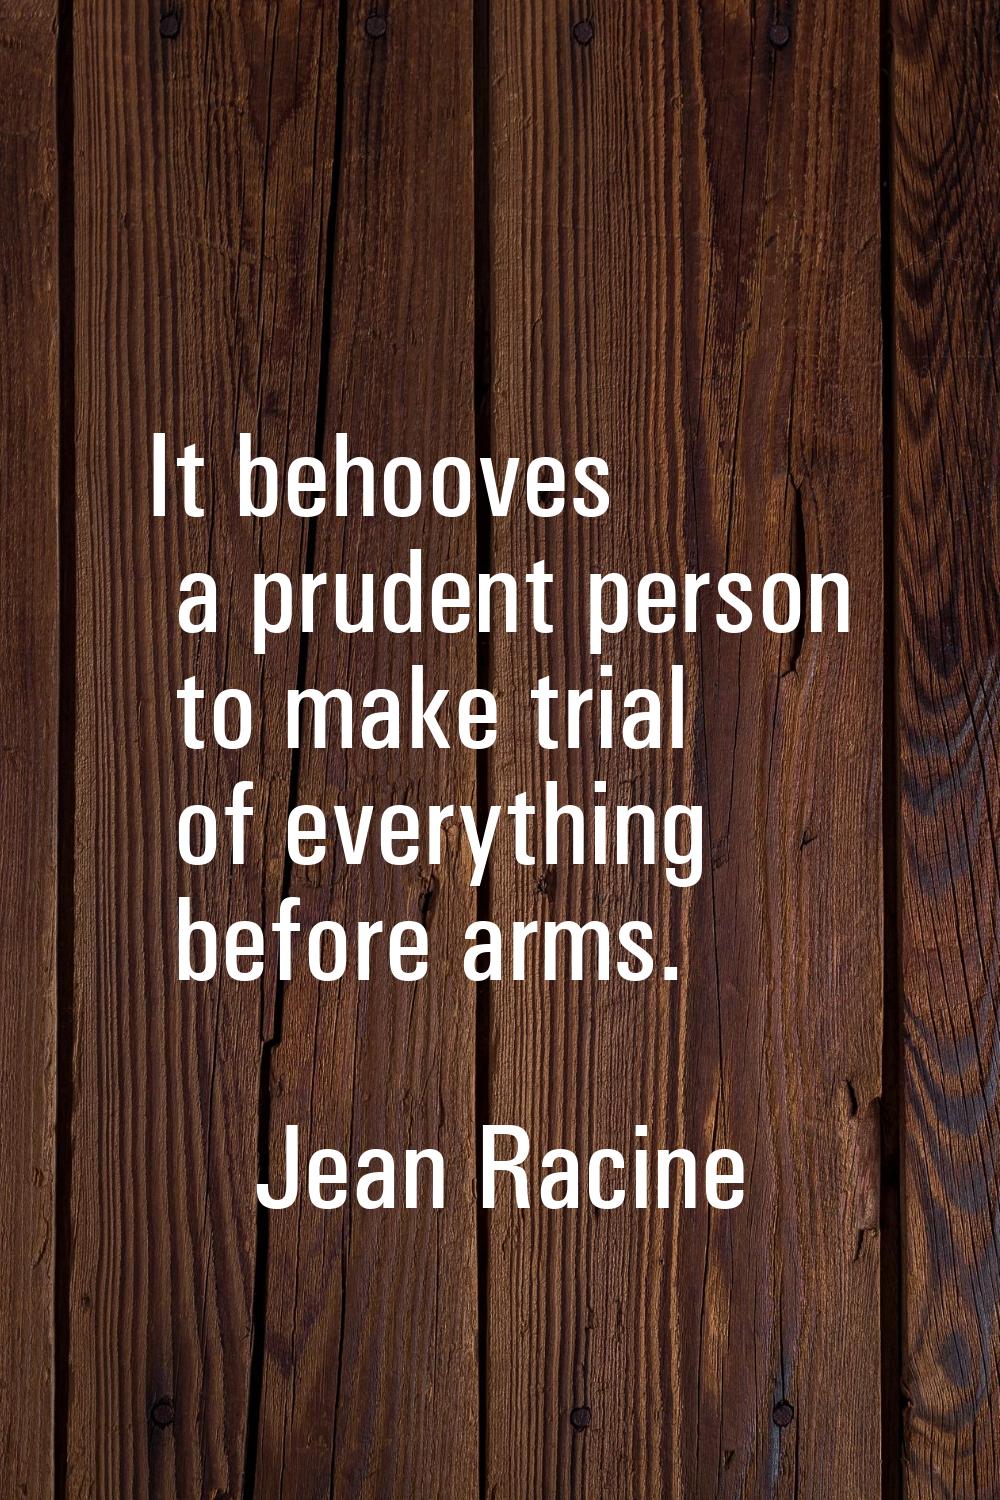 It behooves a prudent person to make trial of everything before arms.